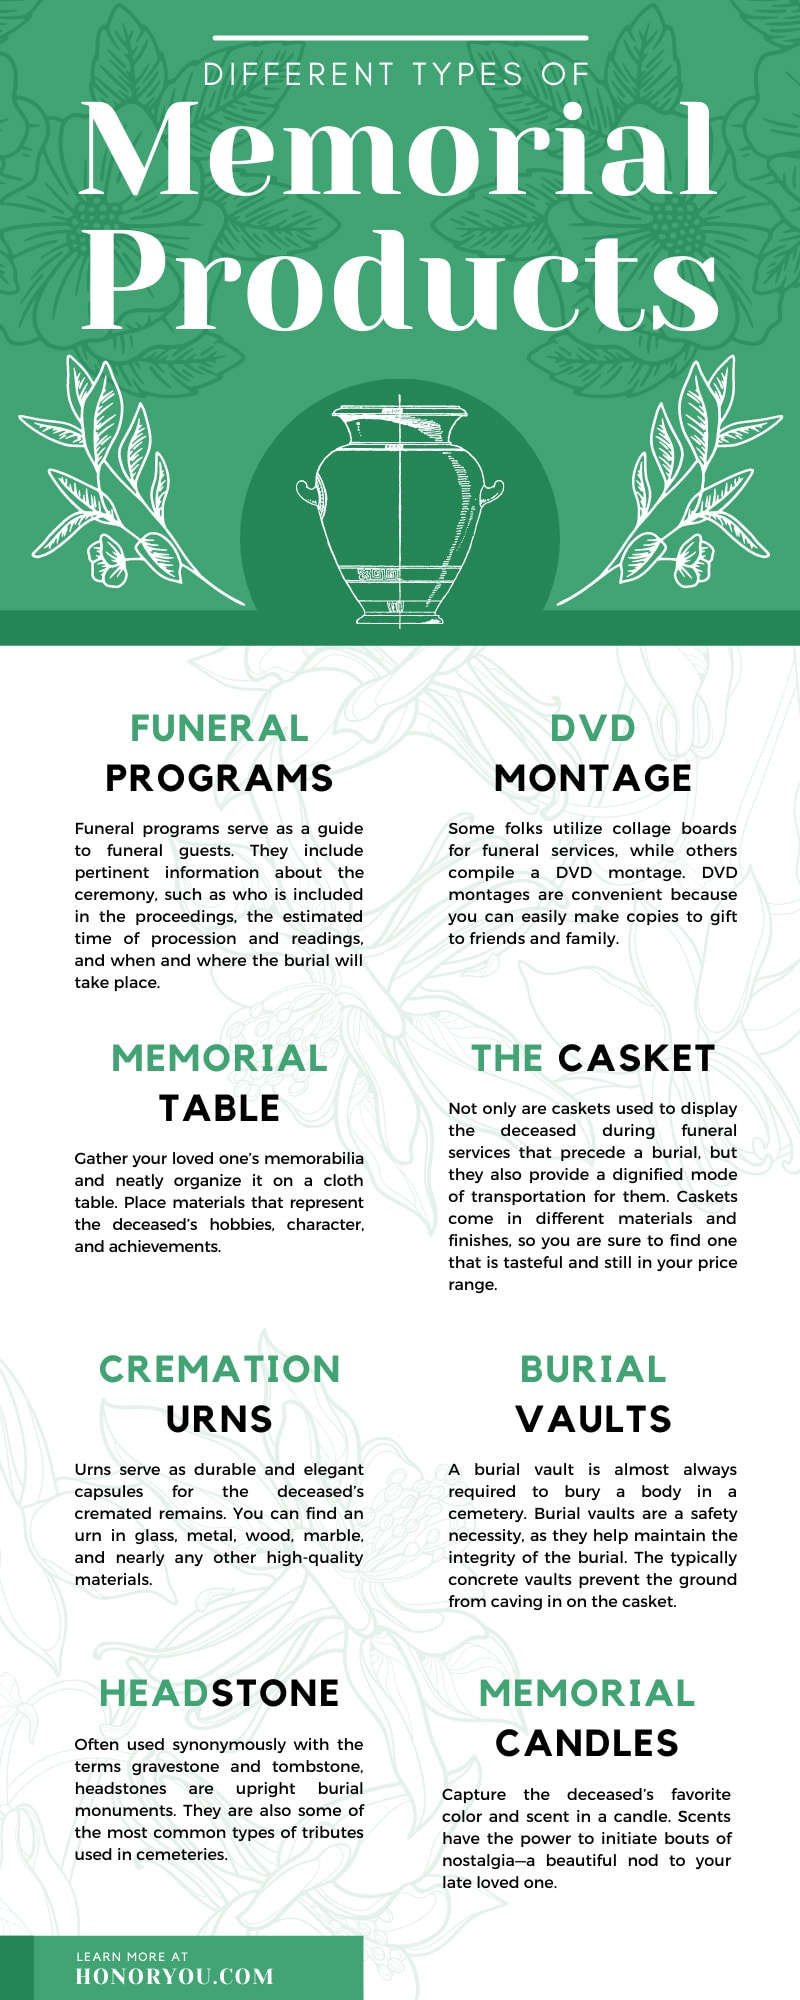 Different Types of Memorial Products